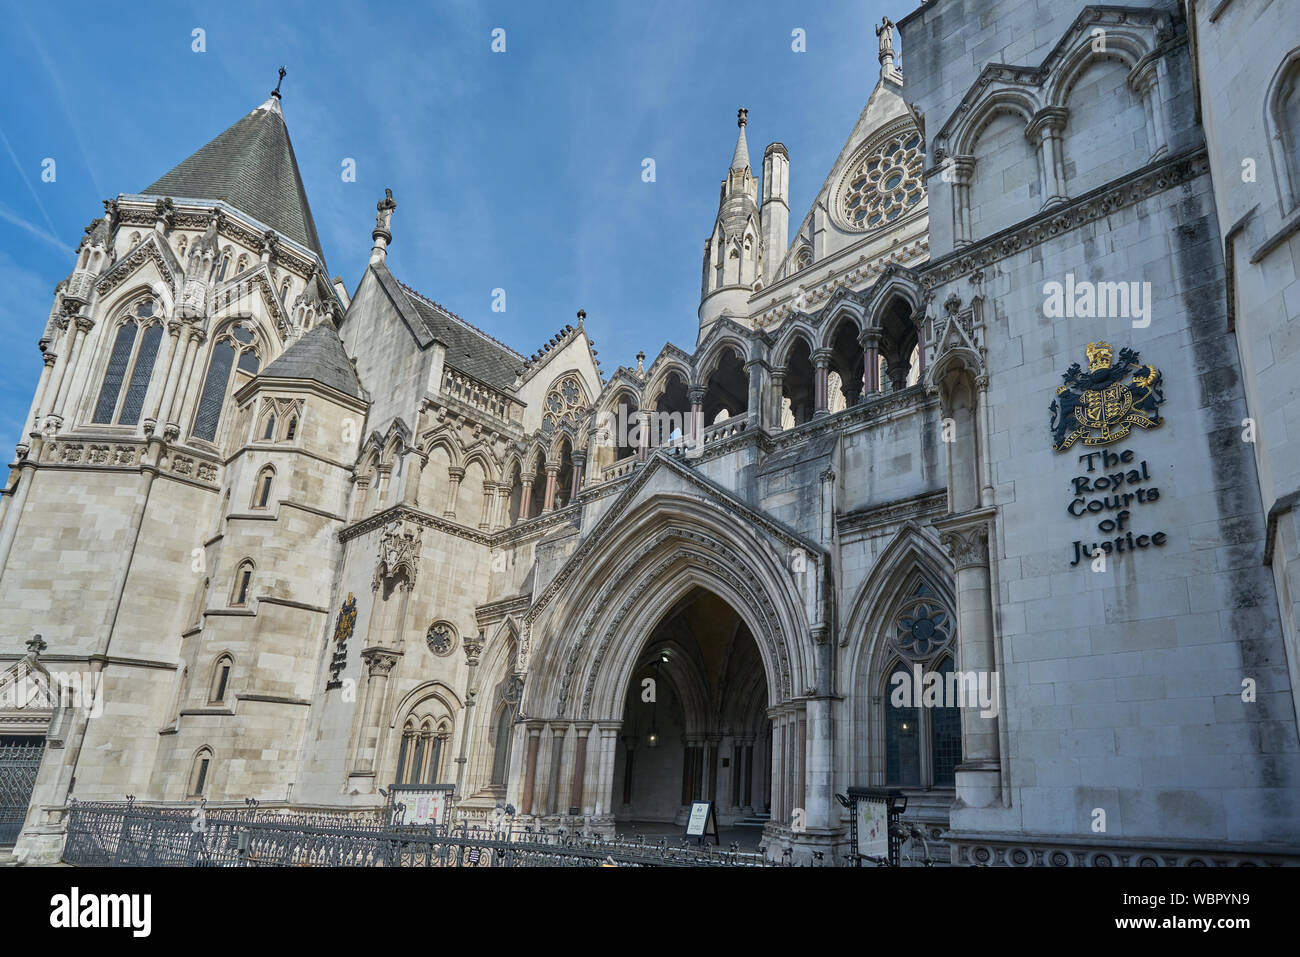 The royal courts of justice London.  The high court. Stock Photo